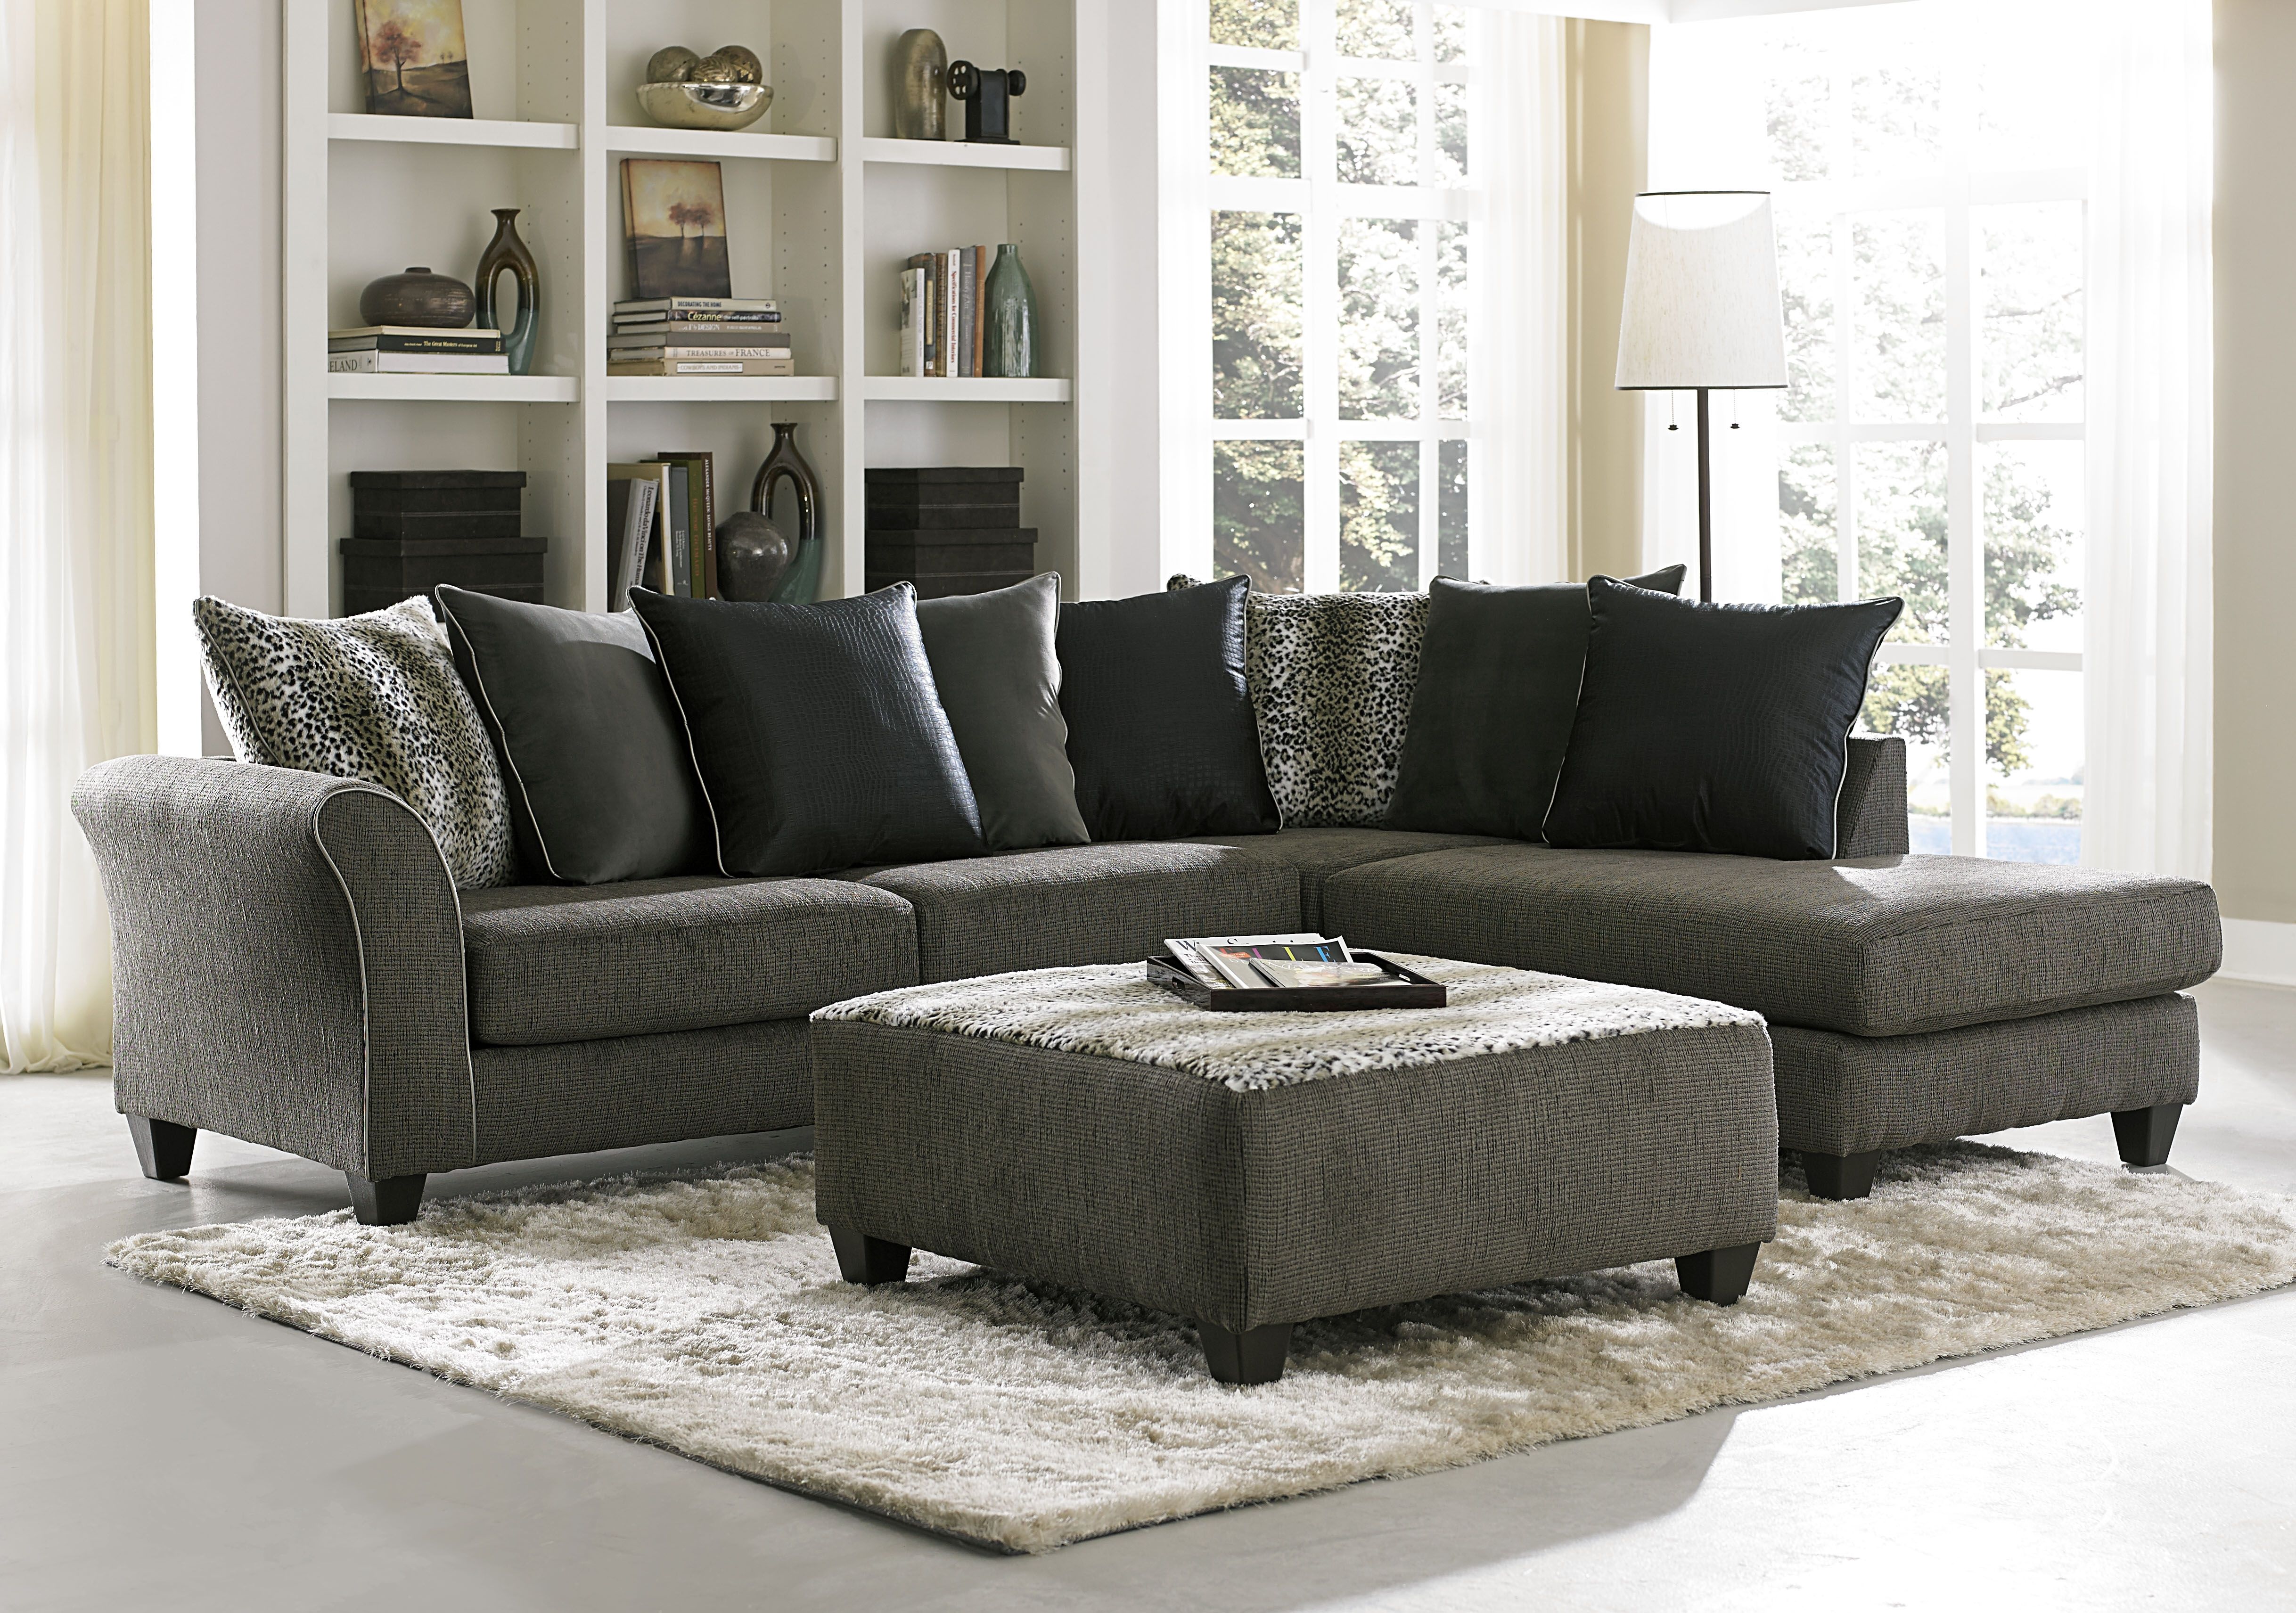 Furniture: American Freight Sectionals For Luxury Living Room Sofas Intended For Memphis Tn Sectional Sofas (View 10 of 10)